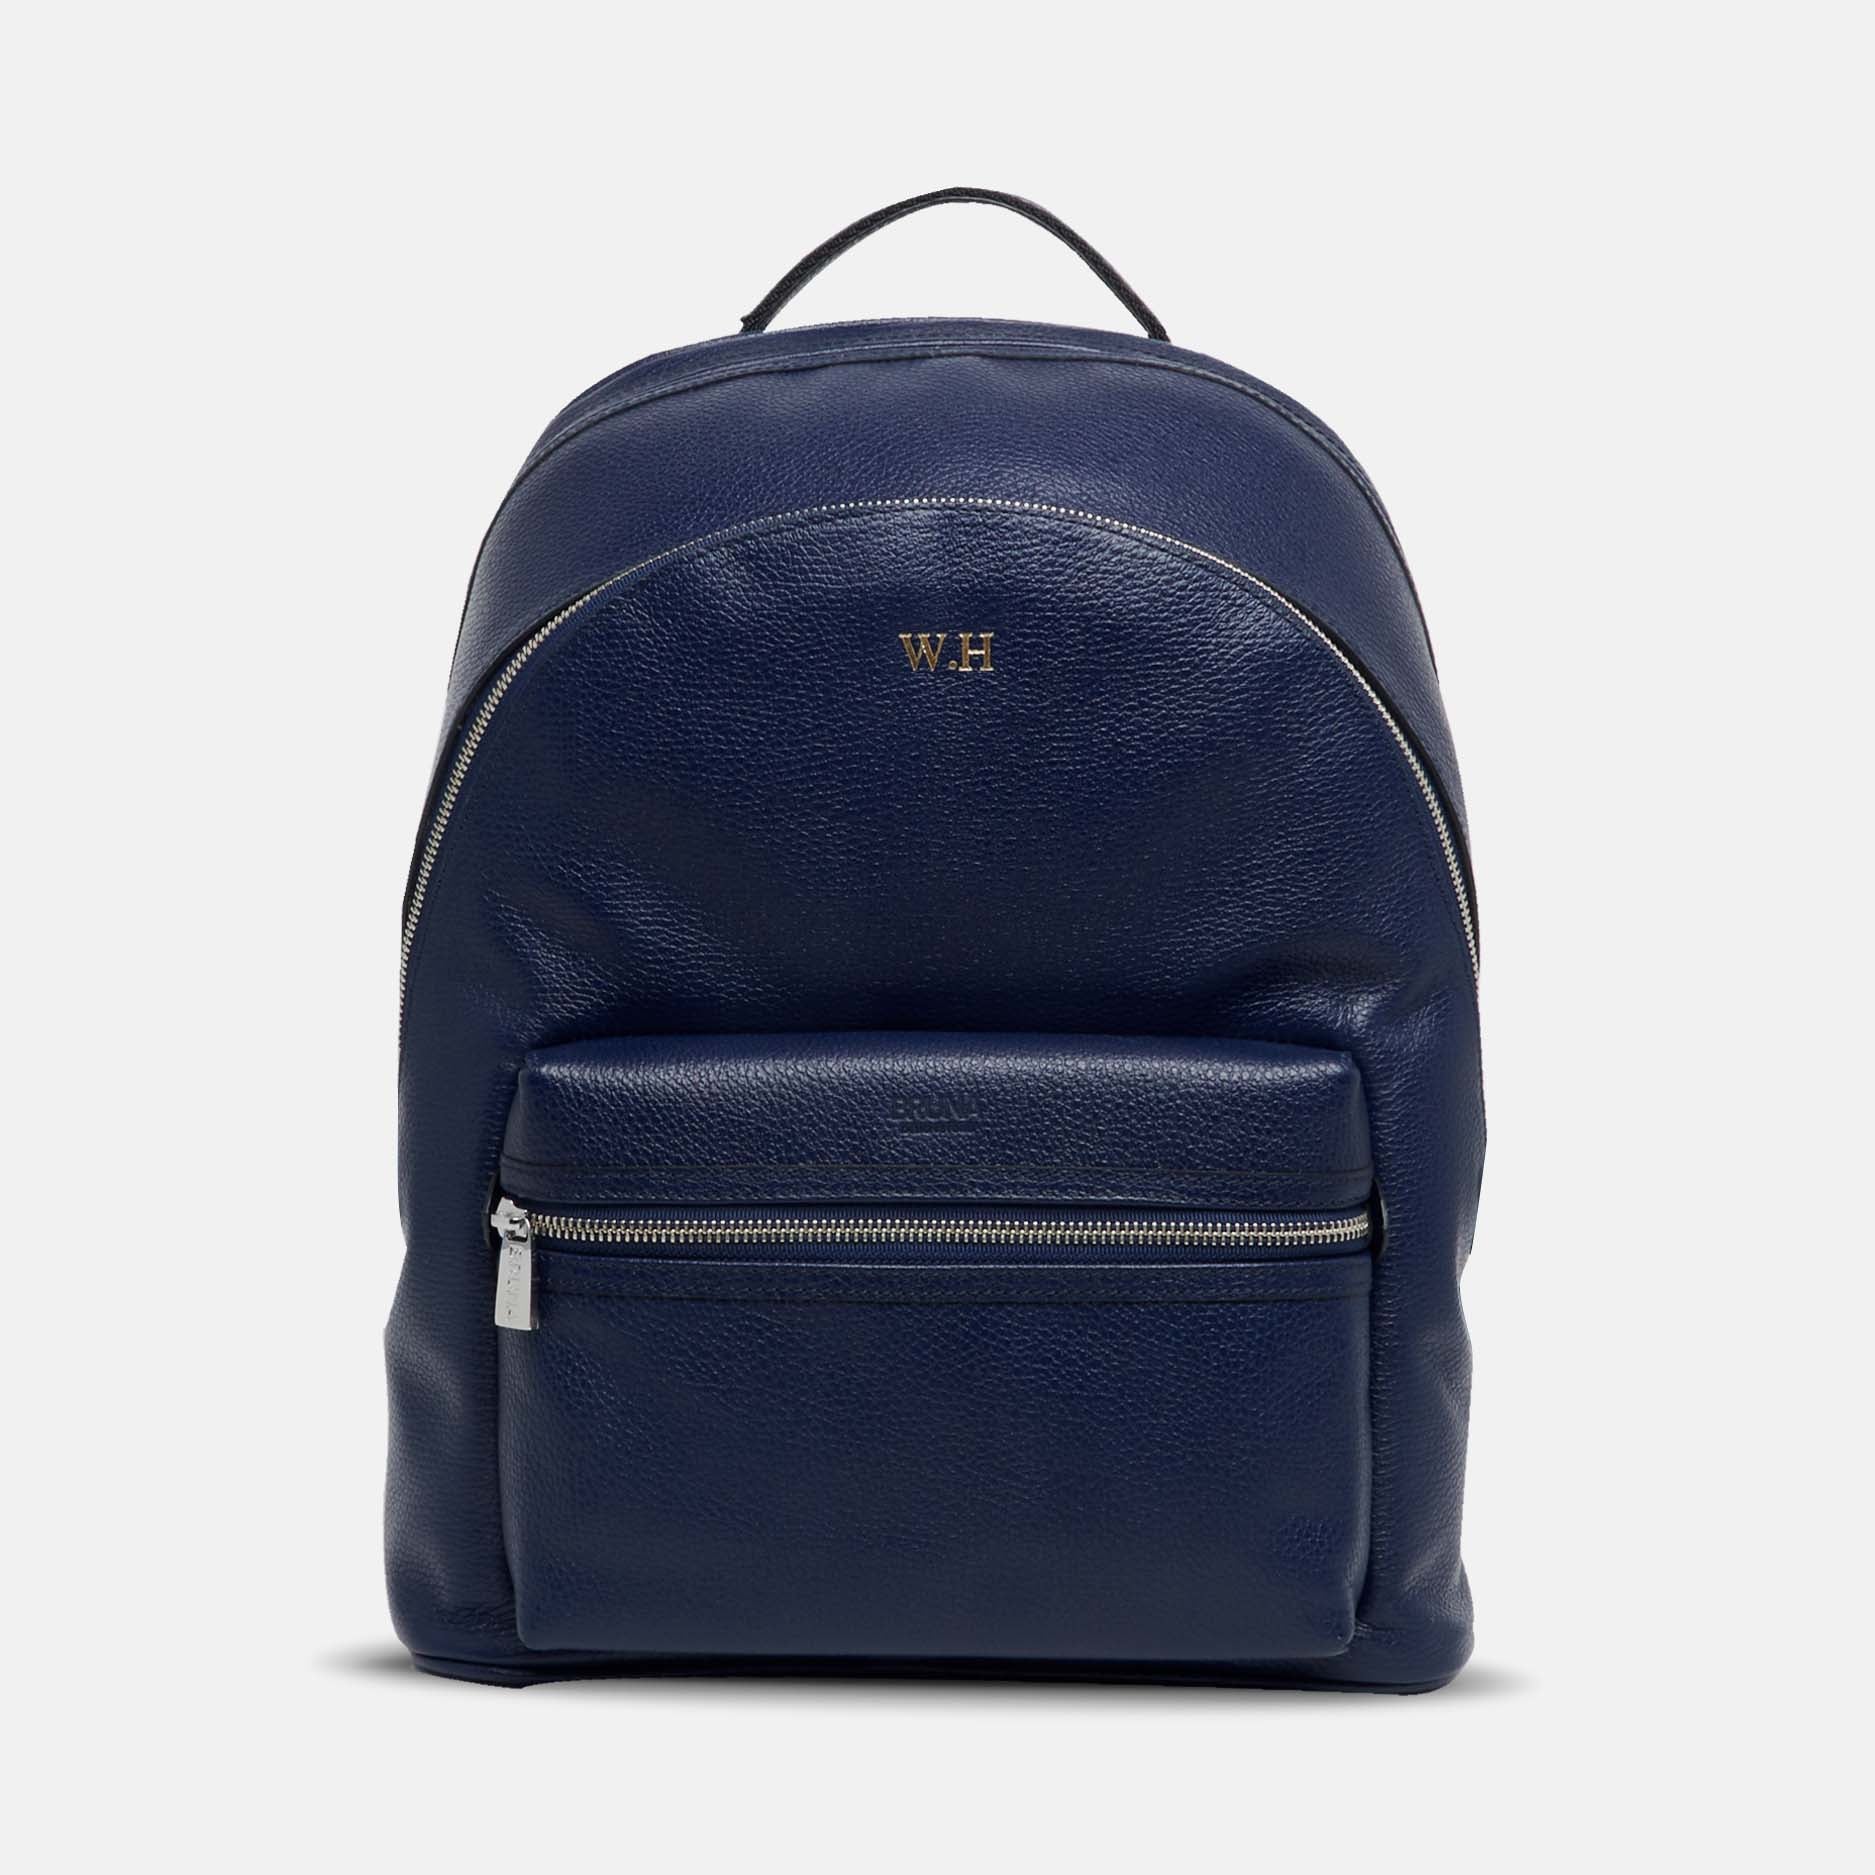 The Backpack - Navy Blue